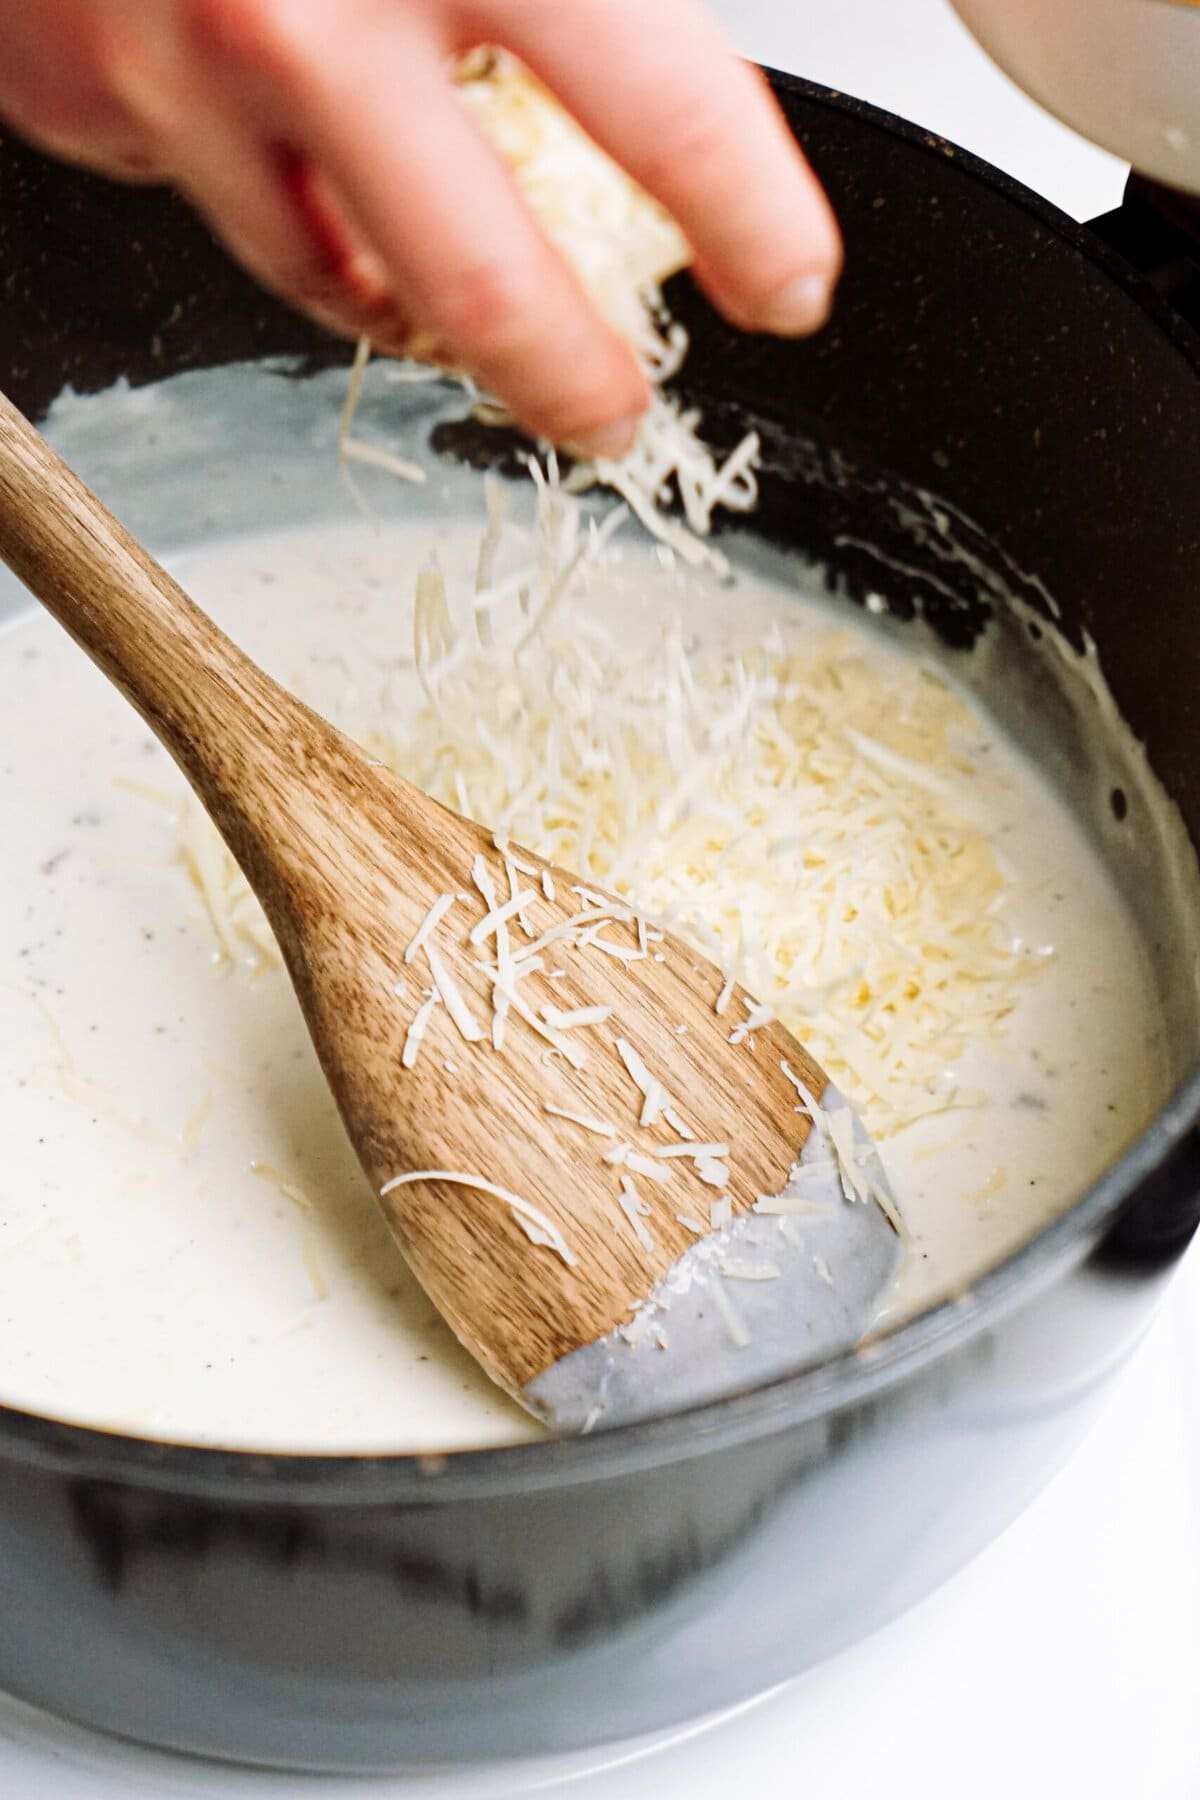 Sprinkling shredded cheese into a creamy sauce in a pan.